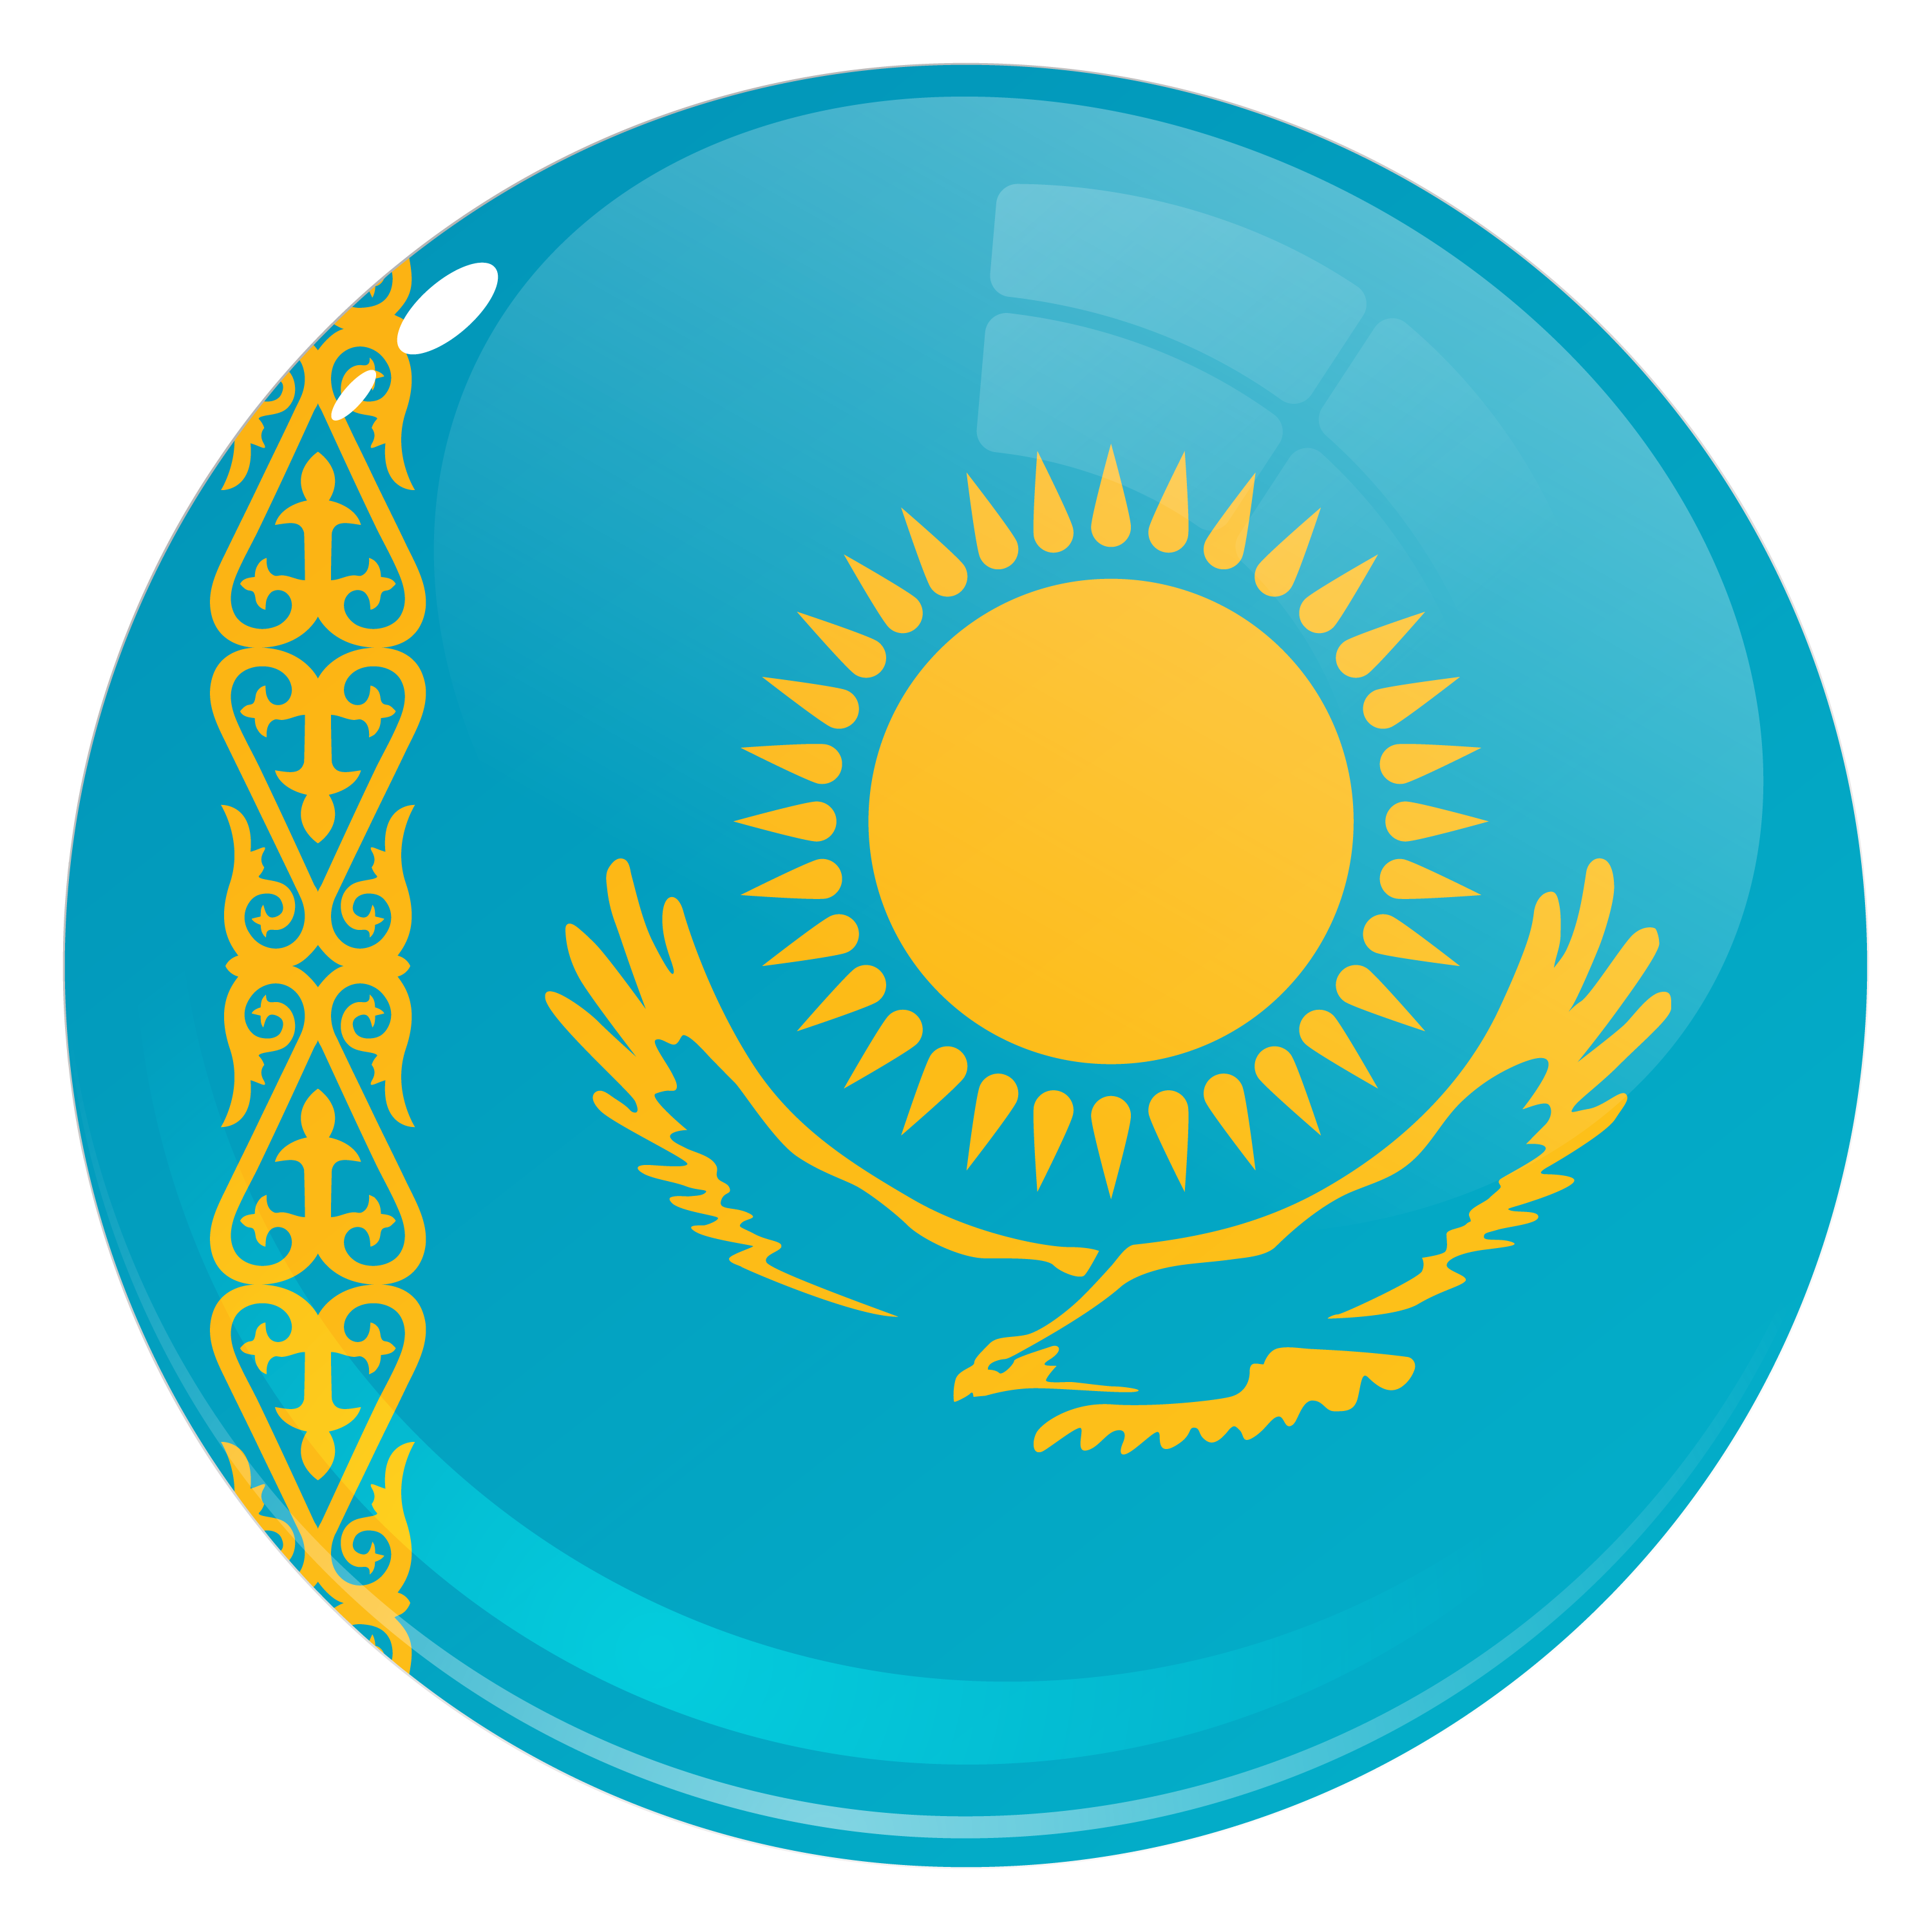 —Pngtree—round country flag kazakhstan_7717501.png